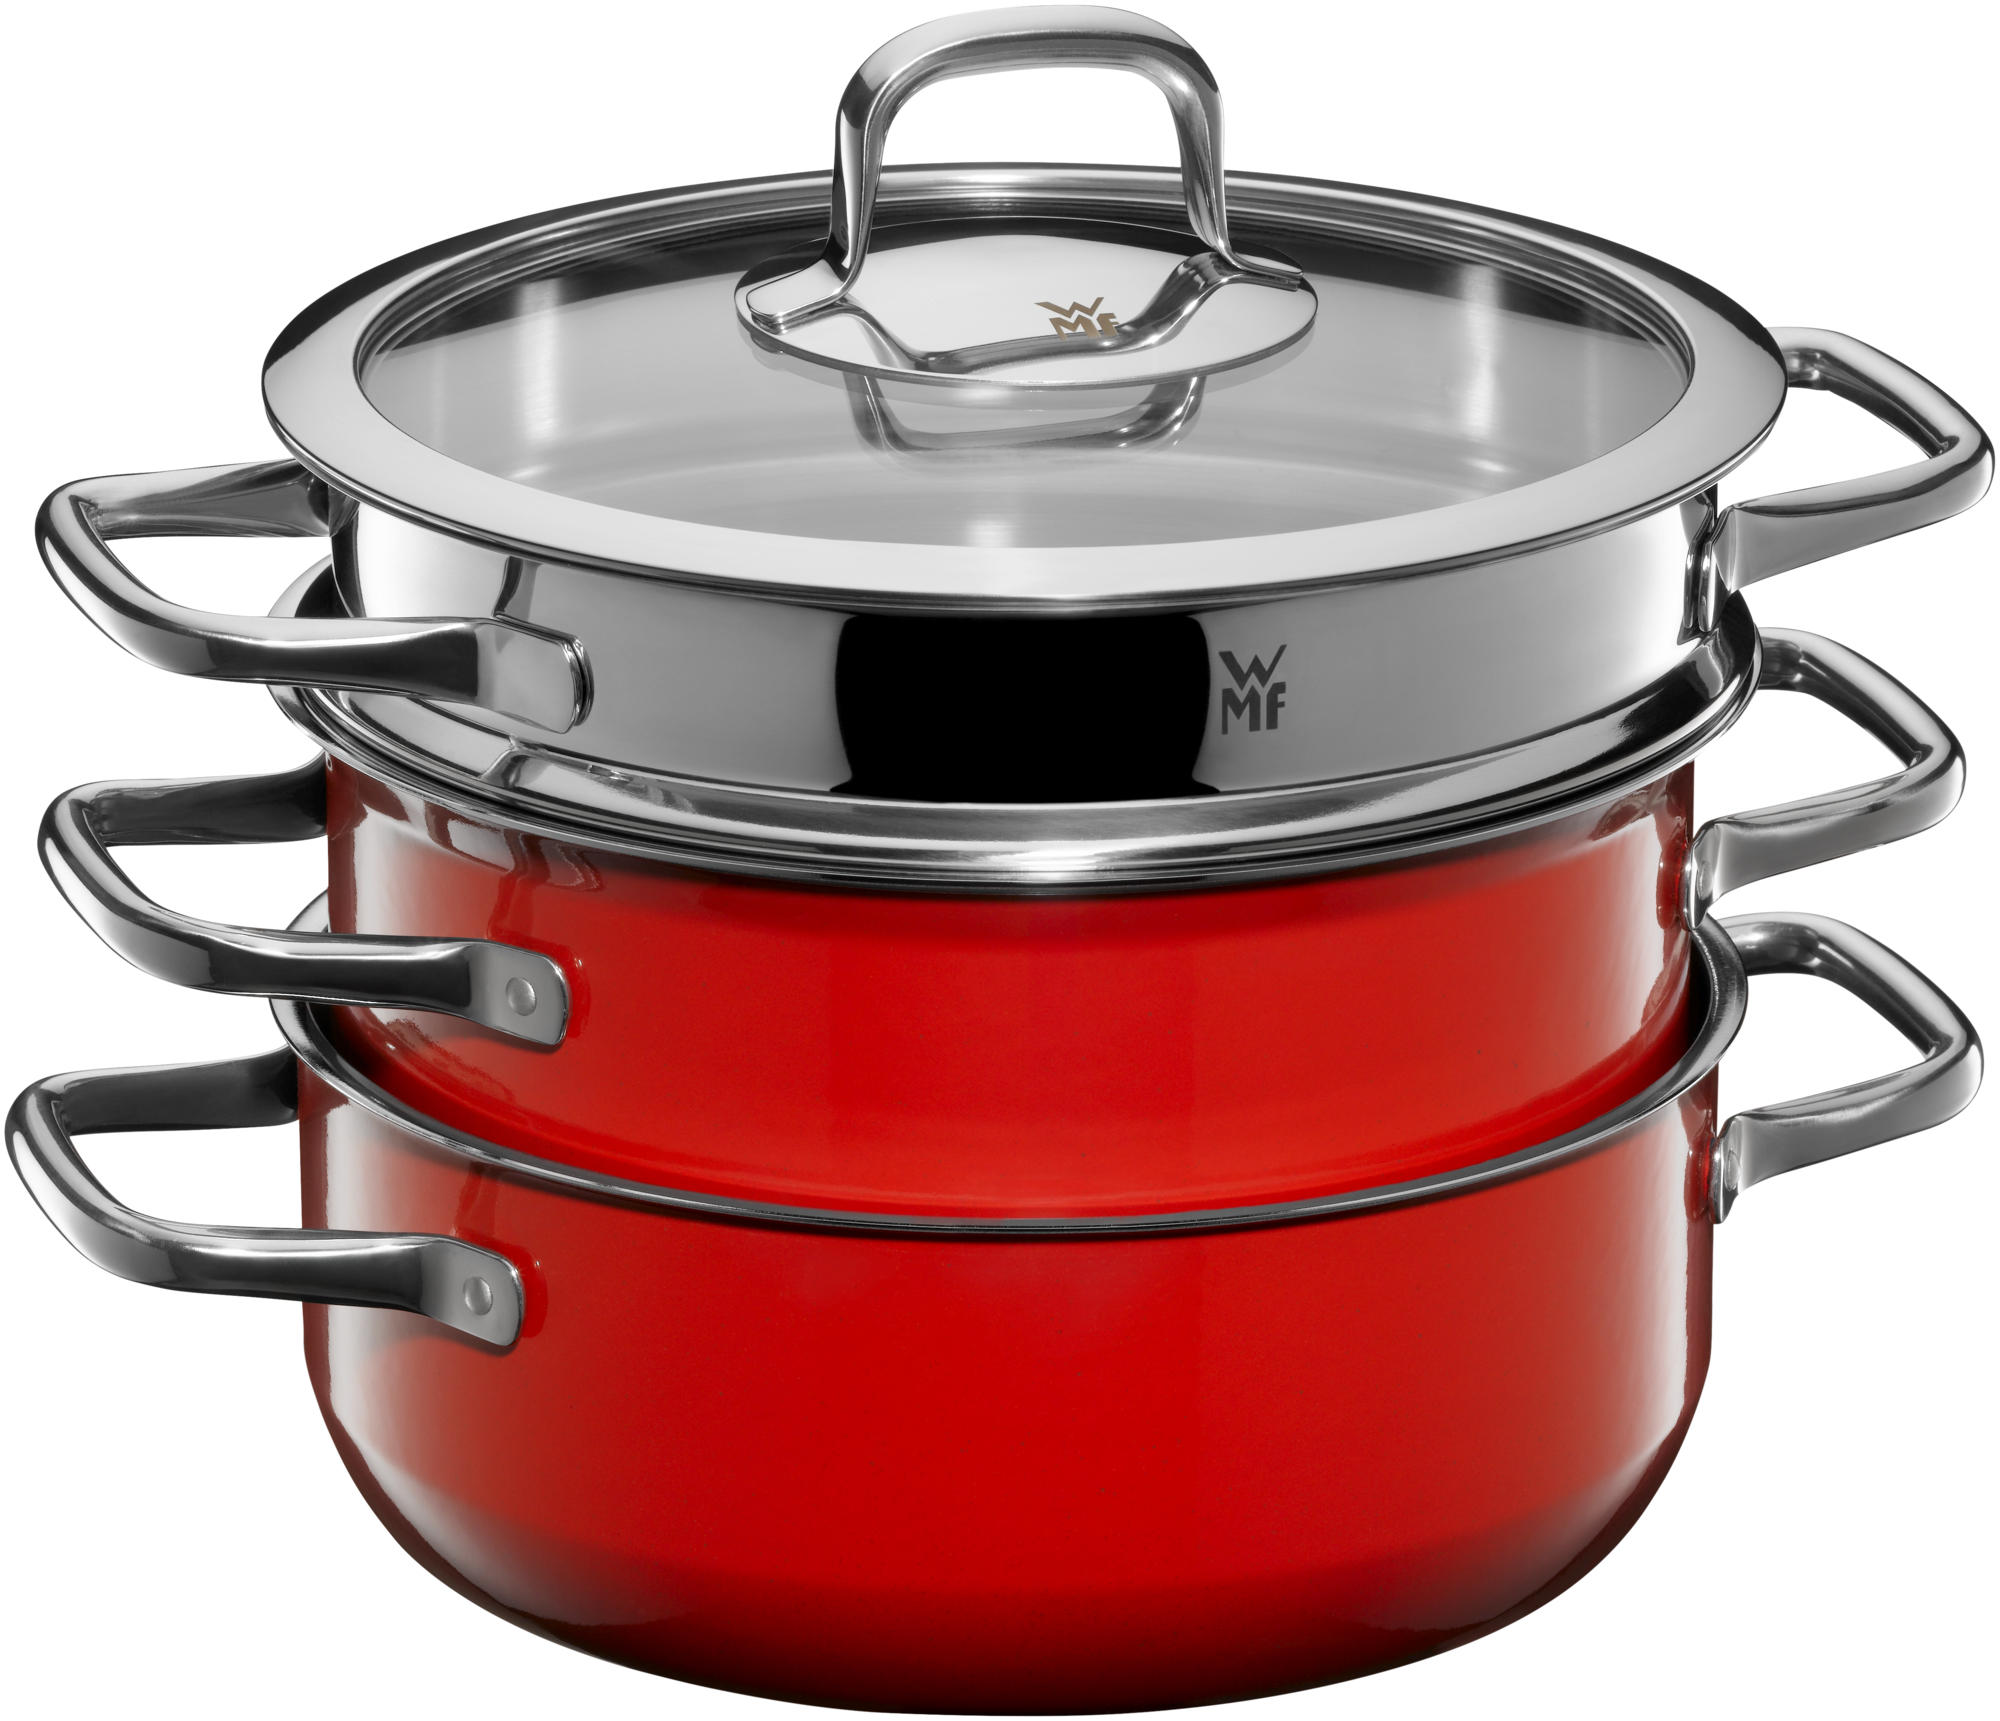 WMF Fusiontec Compact Cookware Set 3-piece Red